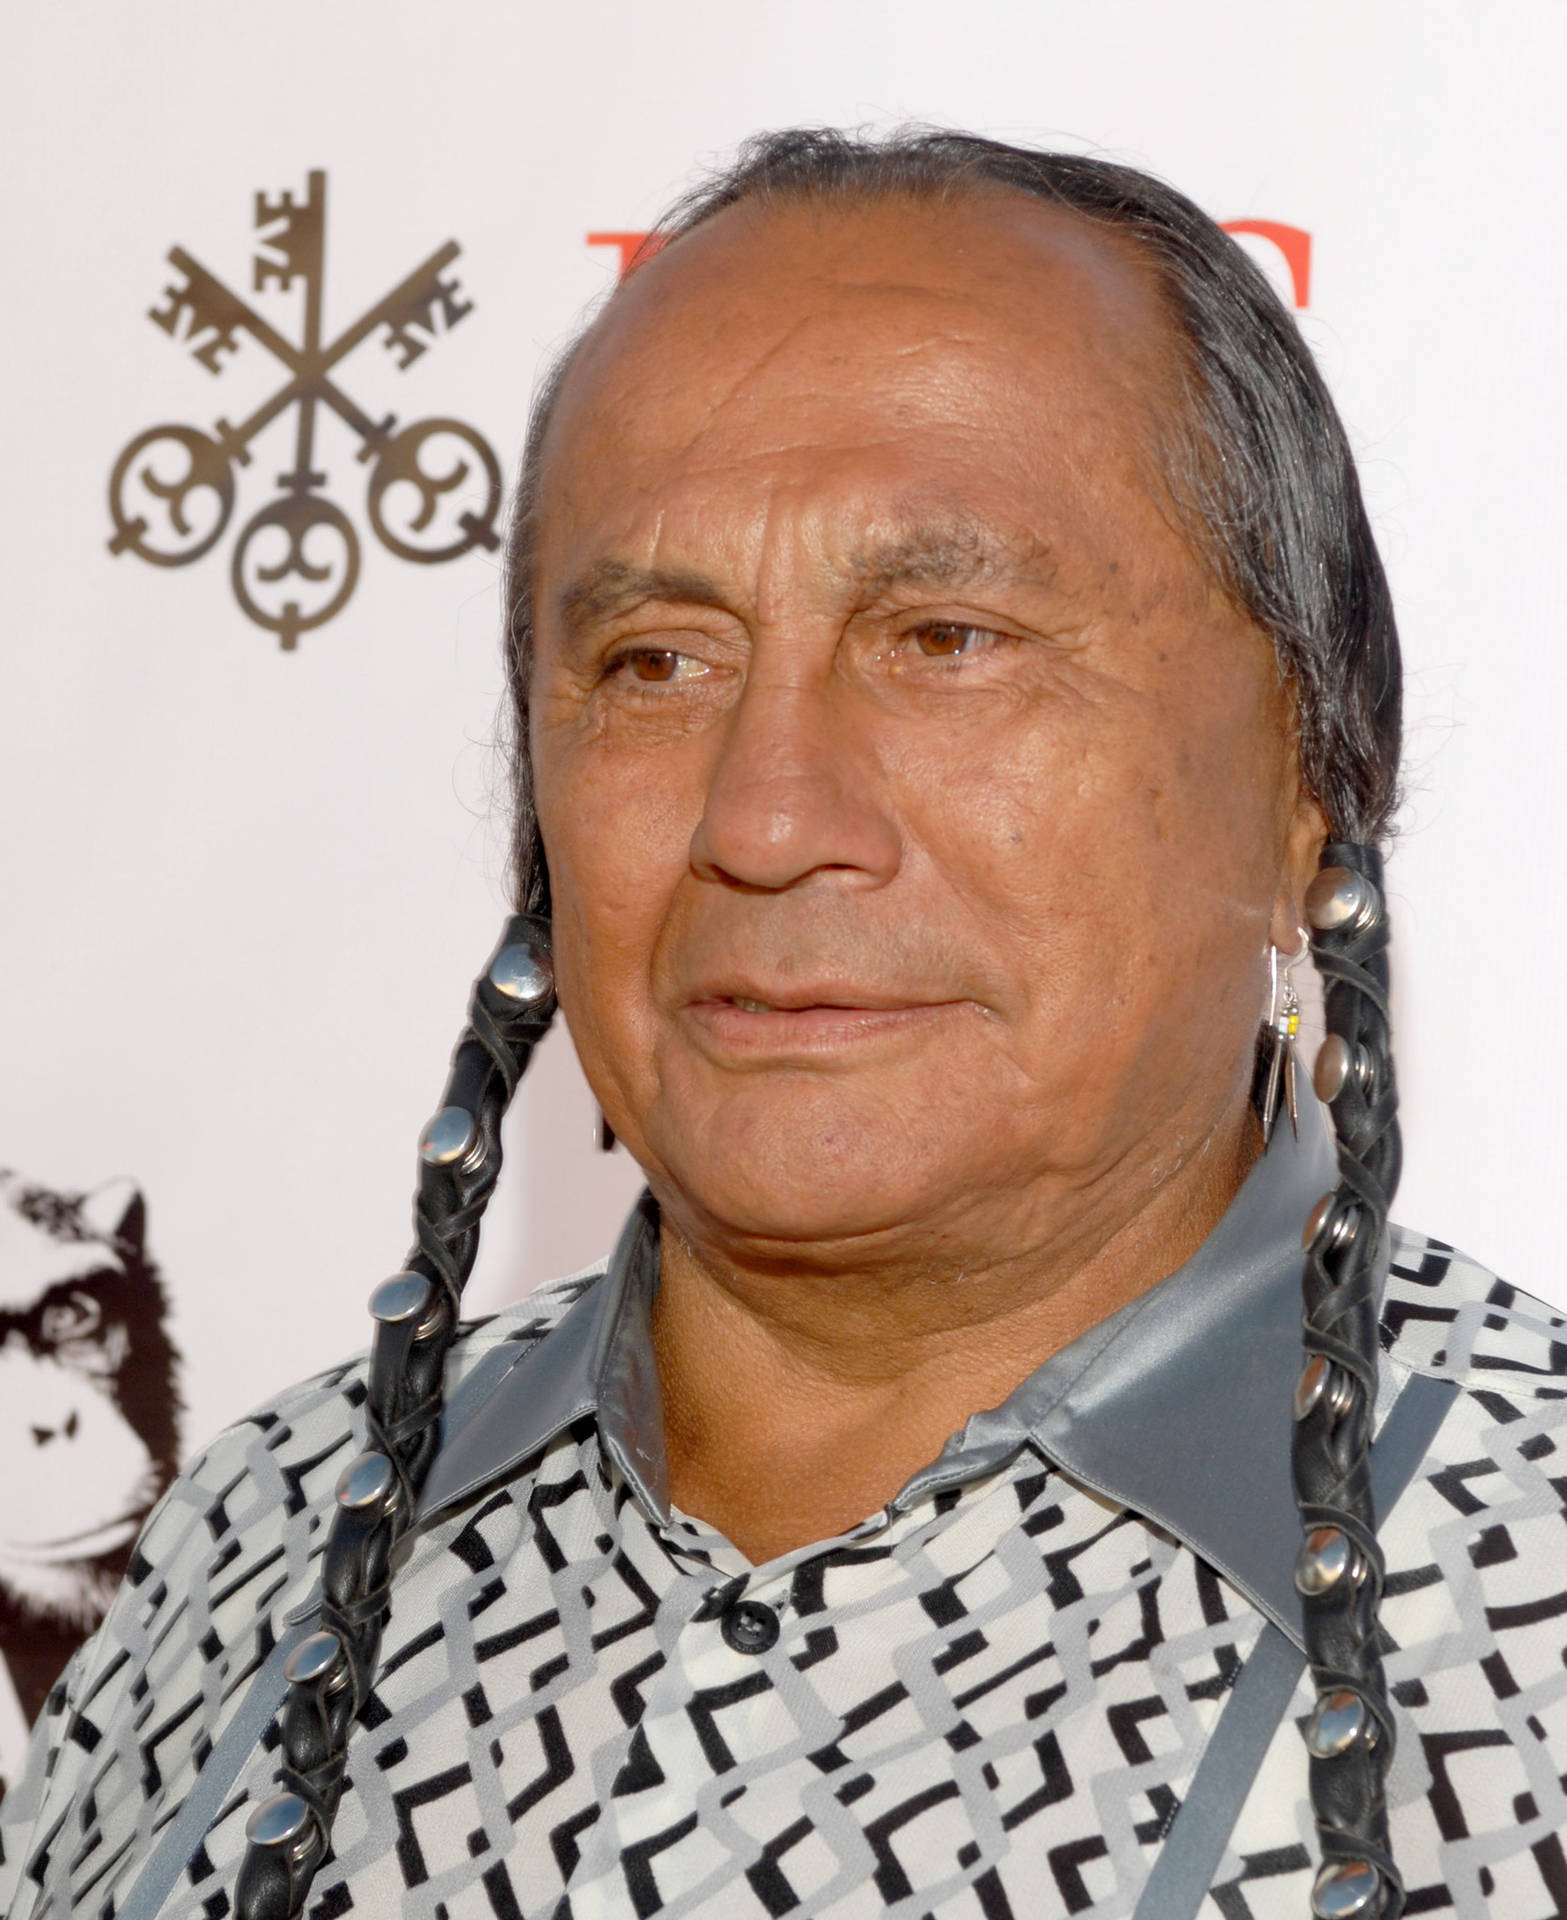 Inspiring Portrait of Russell Means Wallpaper